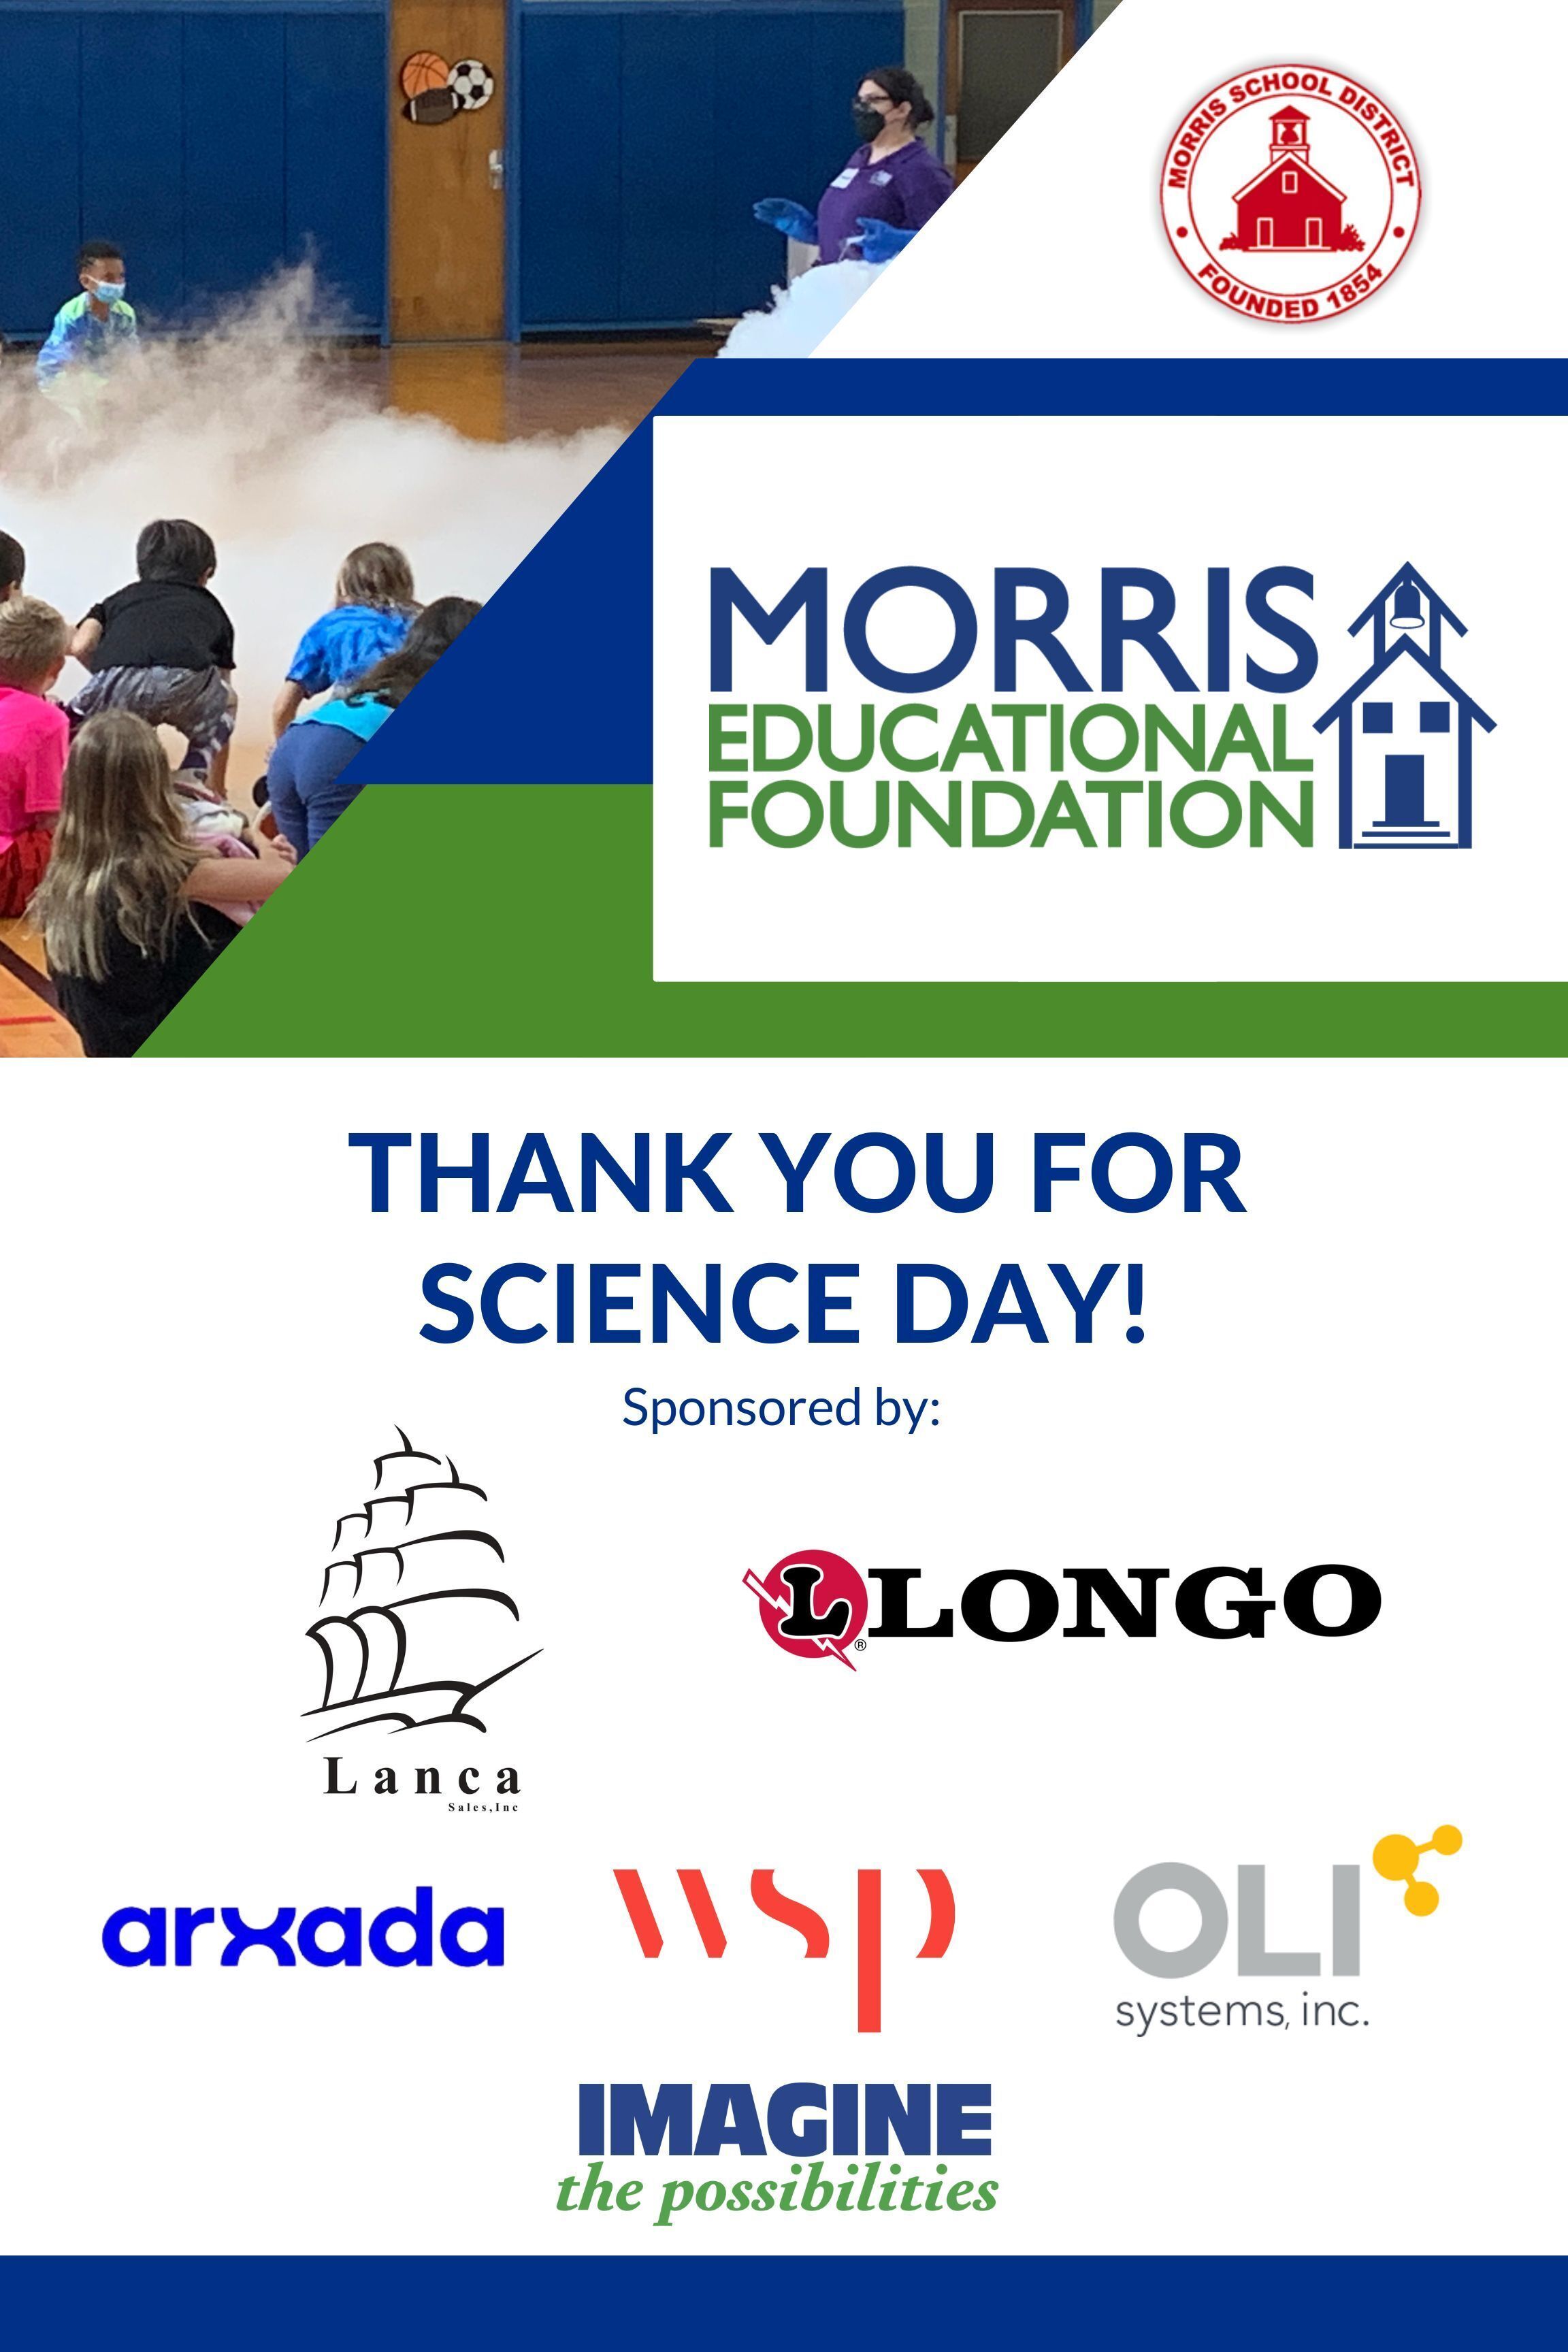 Corporate Community Joins the MEF to Spnosor Elementary Science Days